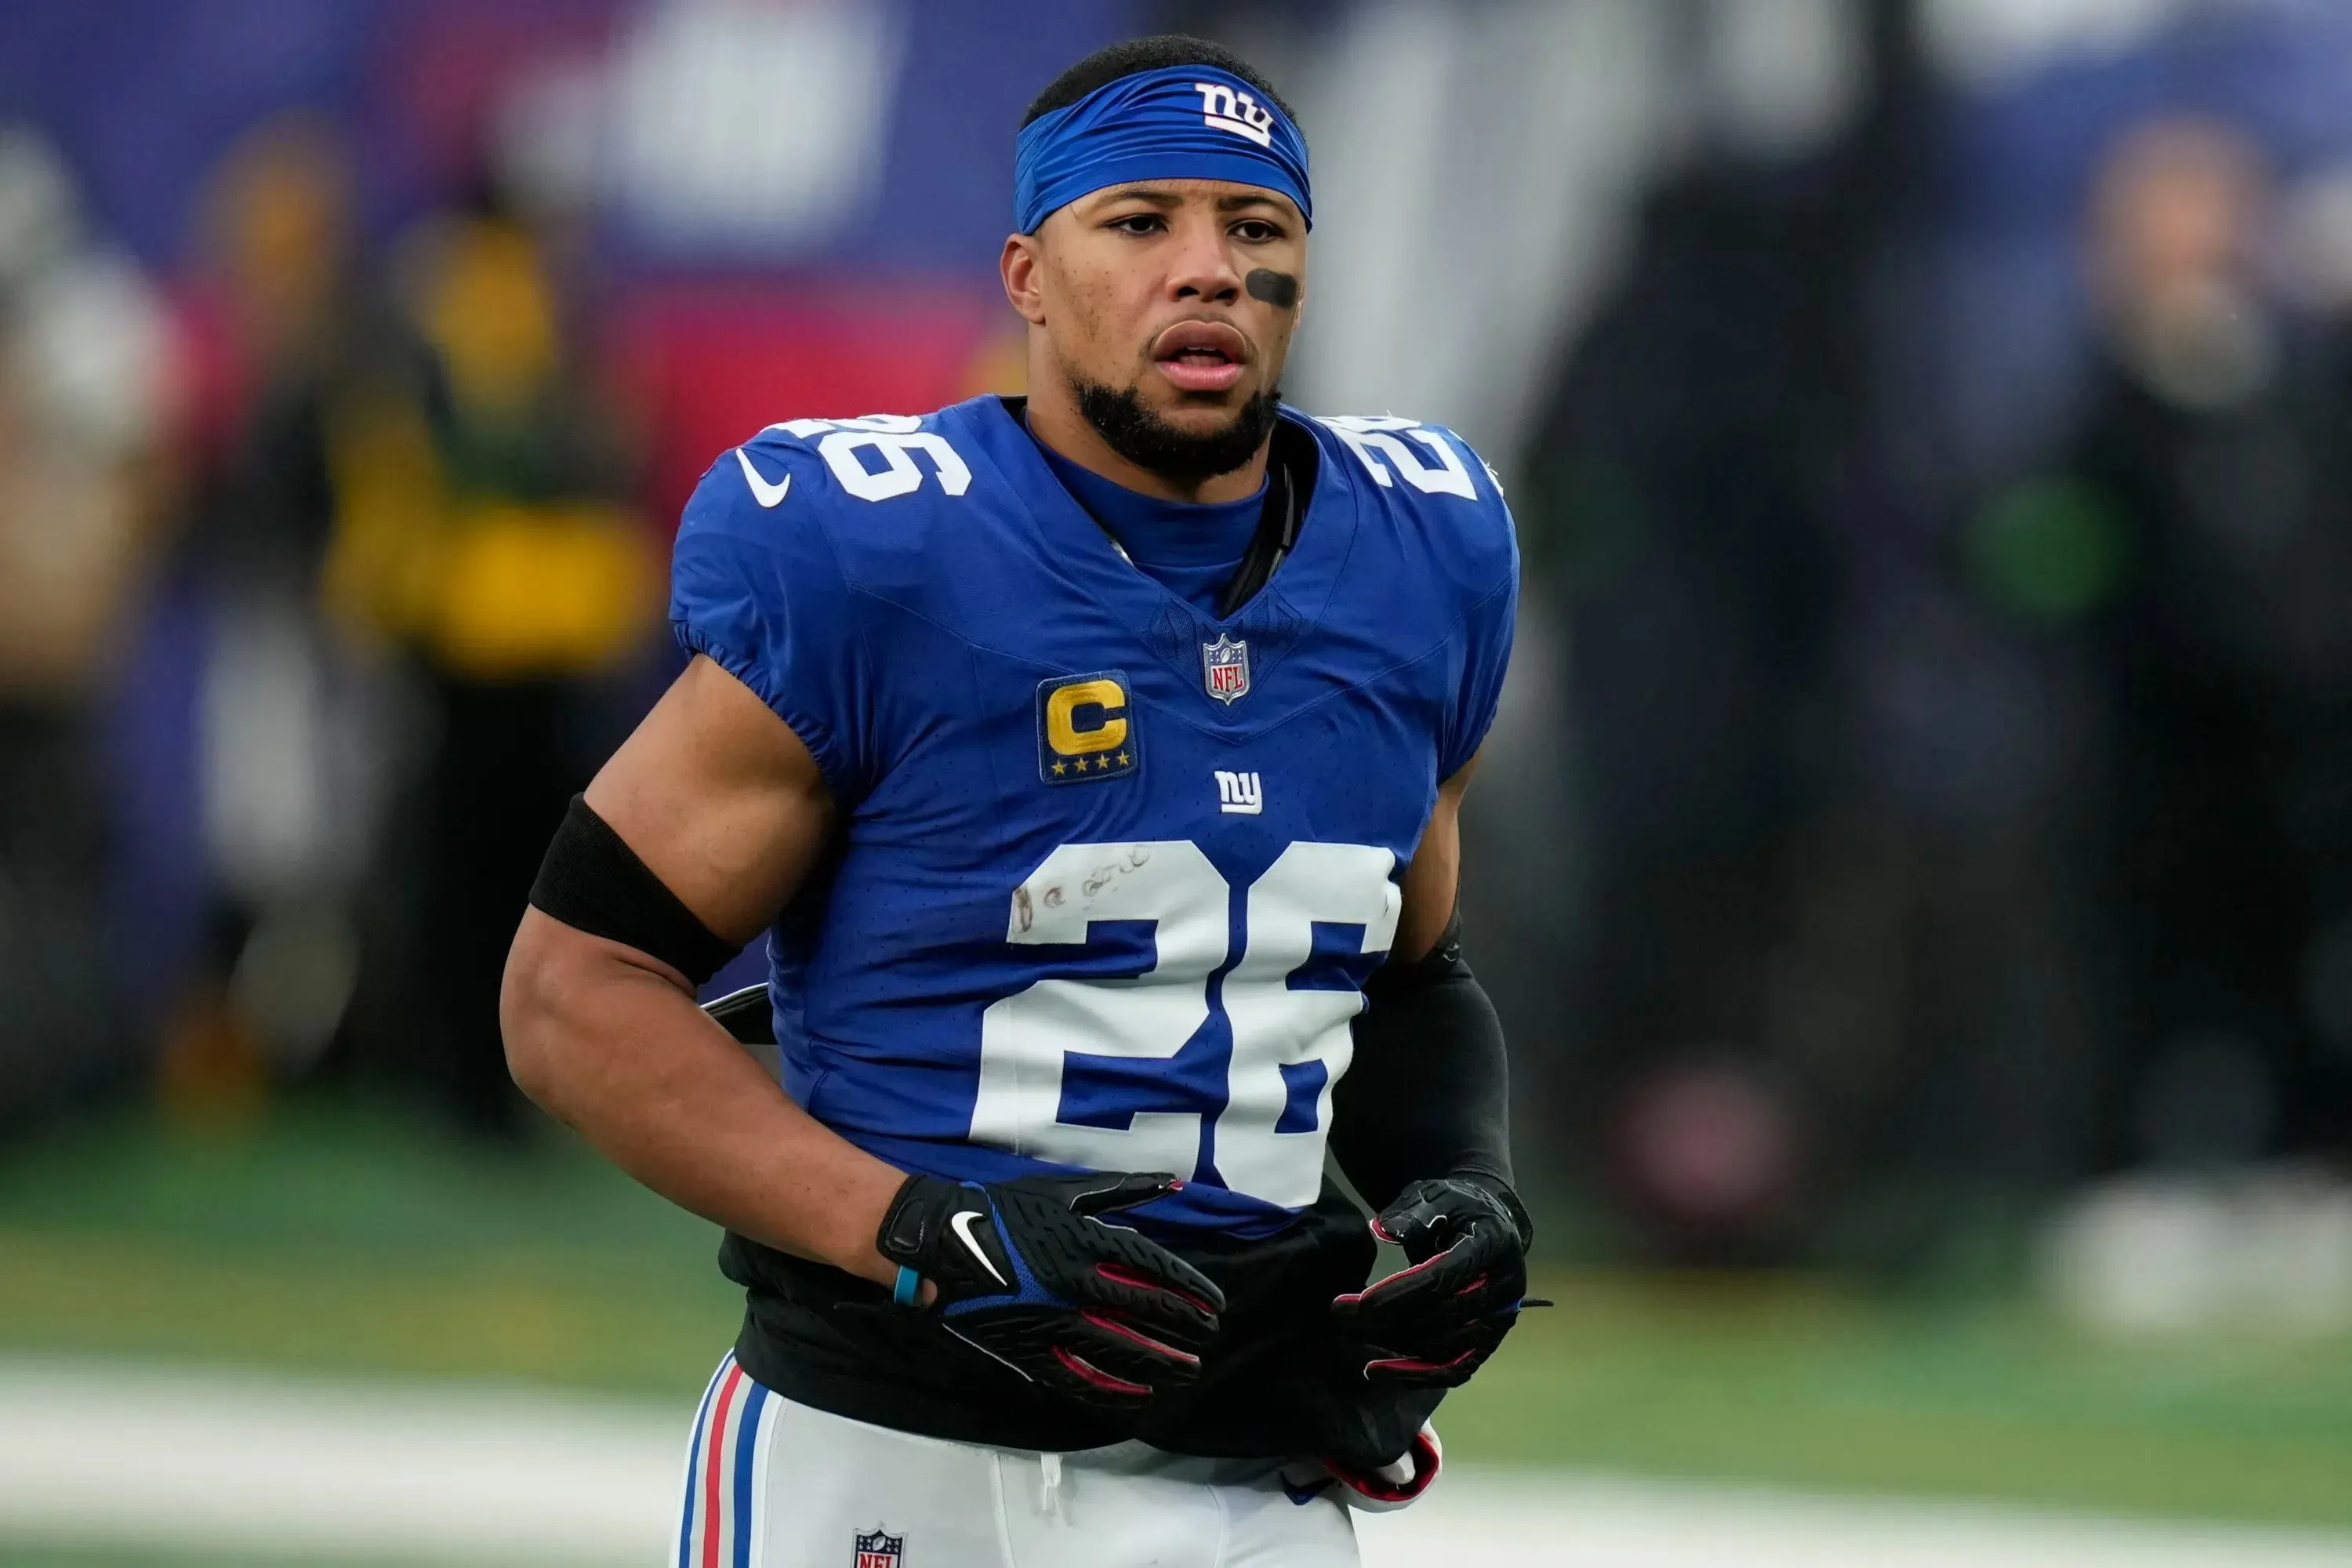 NFL concludes Eagles did not violate tampering rules with Saquon Barkley